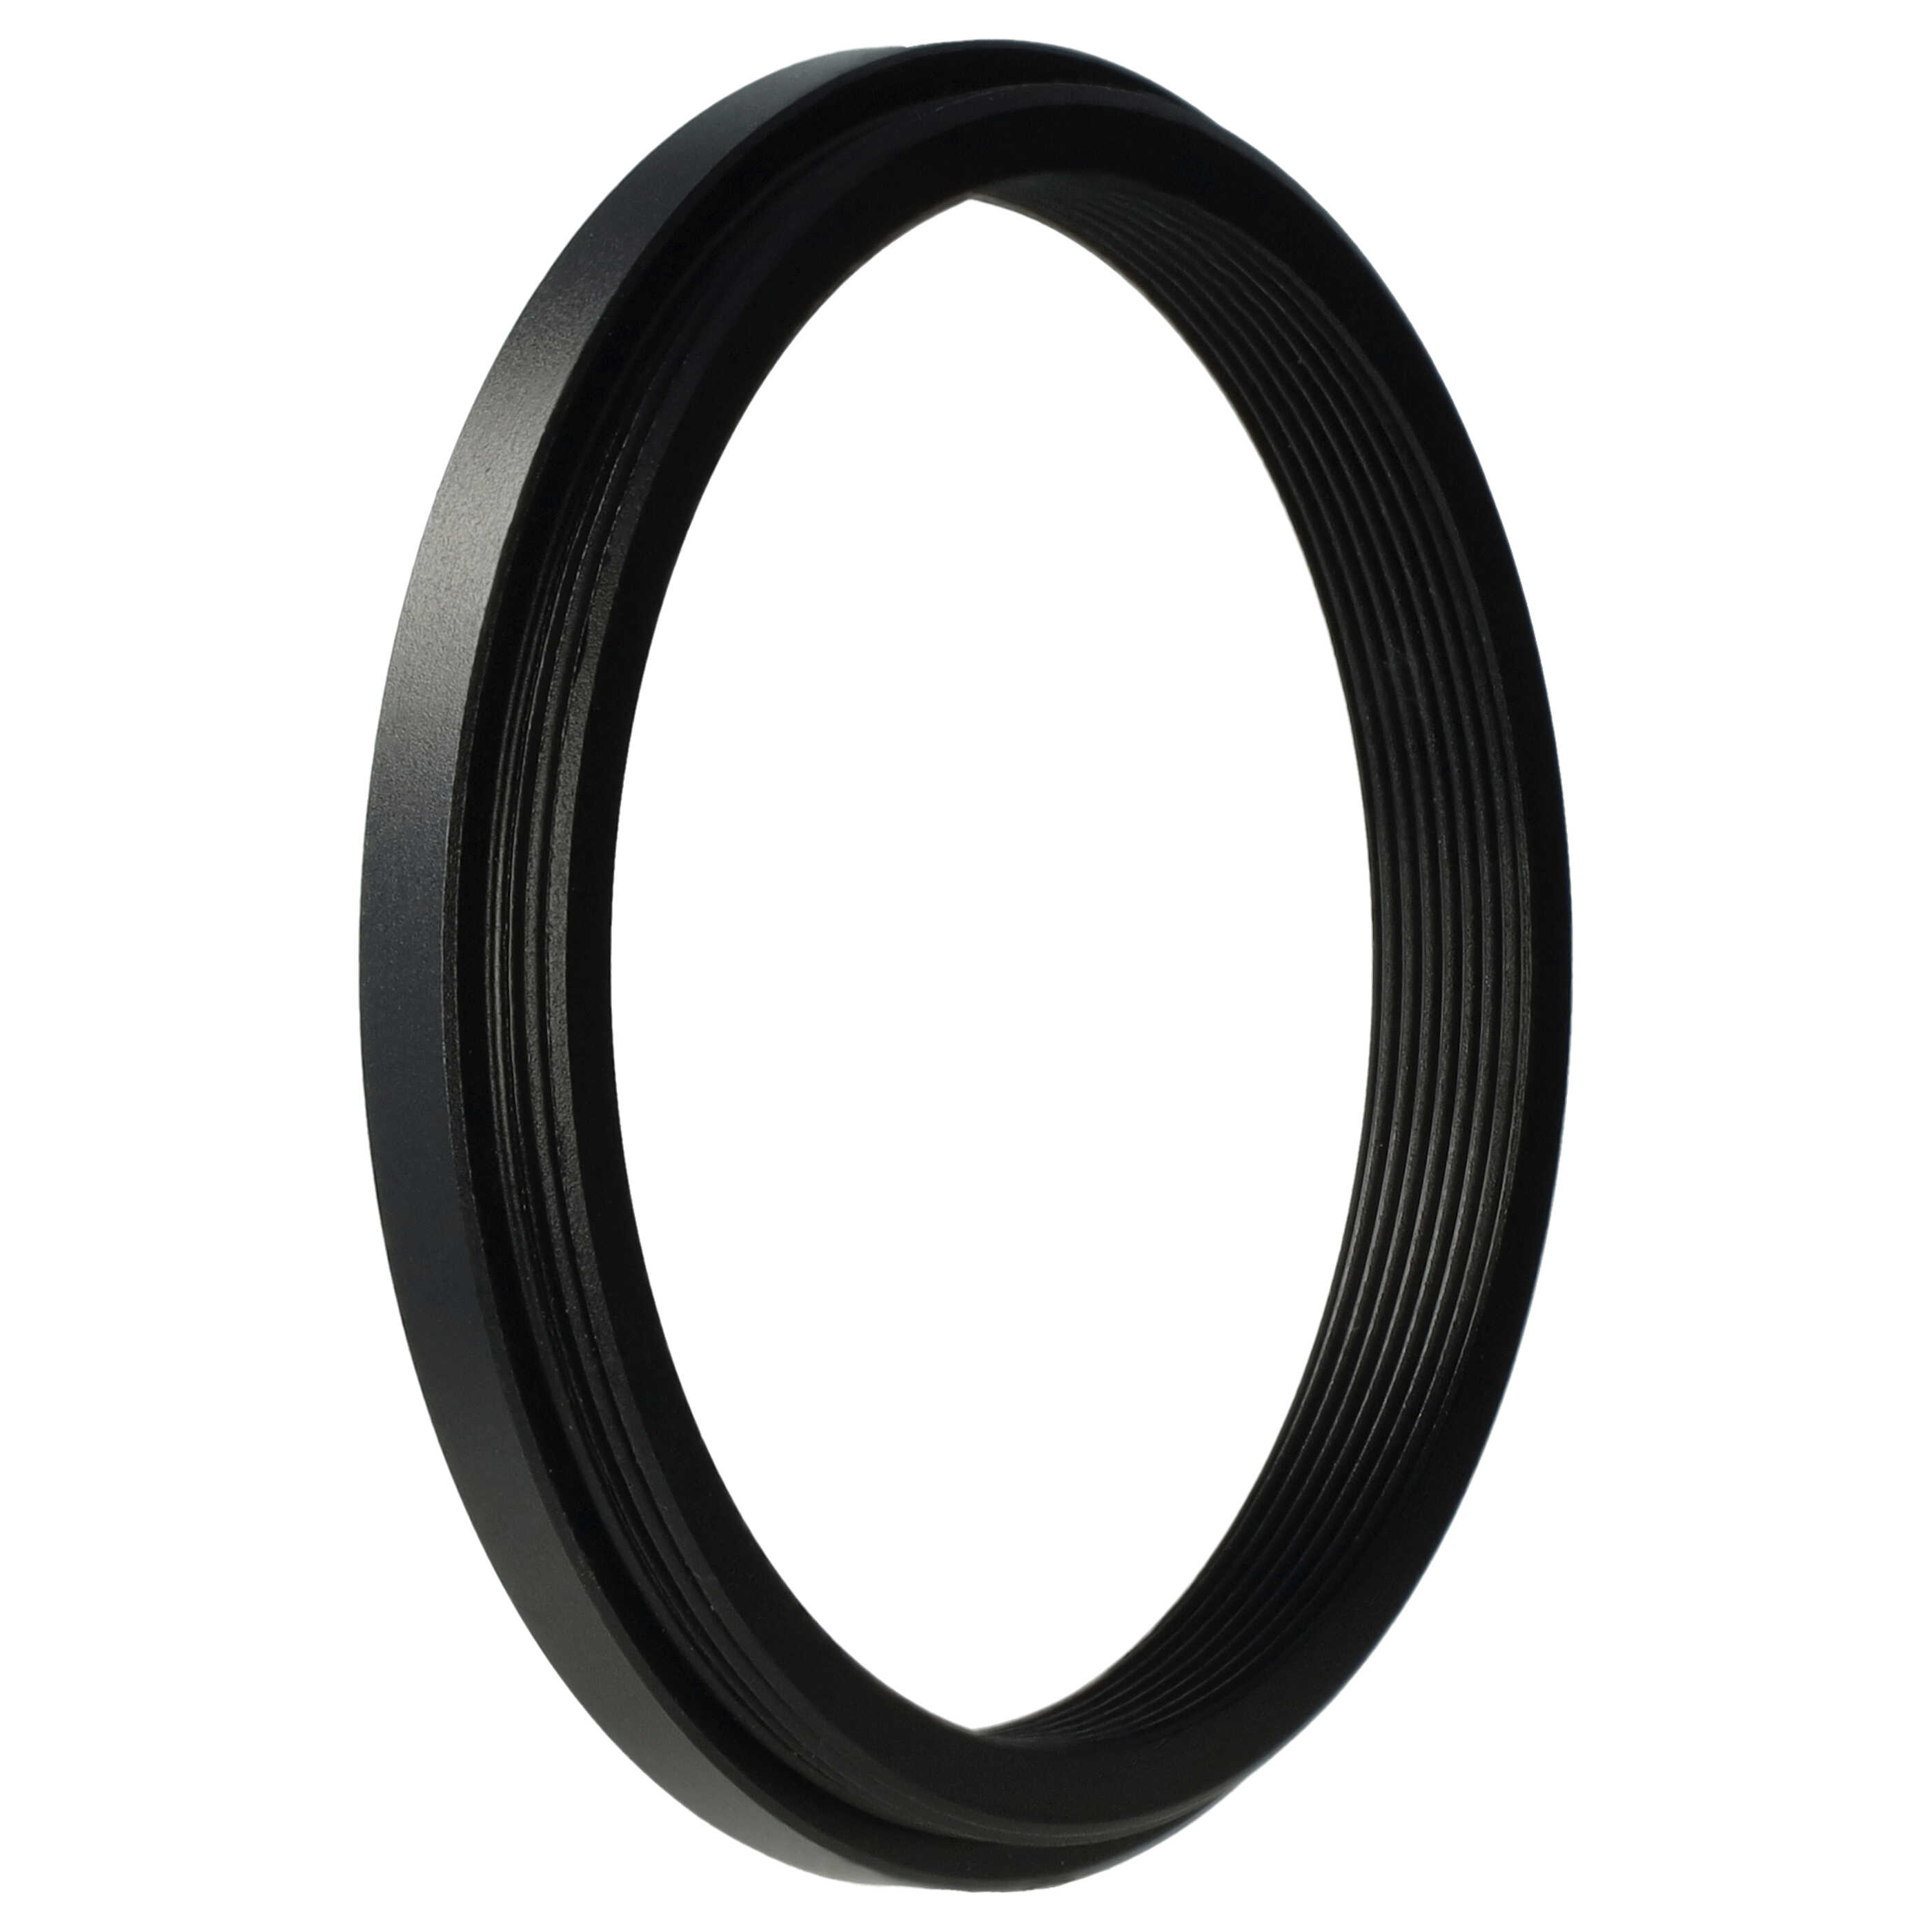 Step-Down Ring Adapter from 52 mm to 46 mm suitable for Camera Lens - Filter Adapter, metal